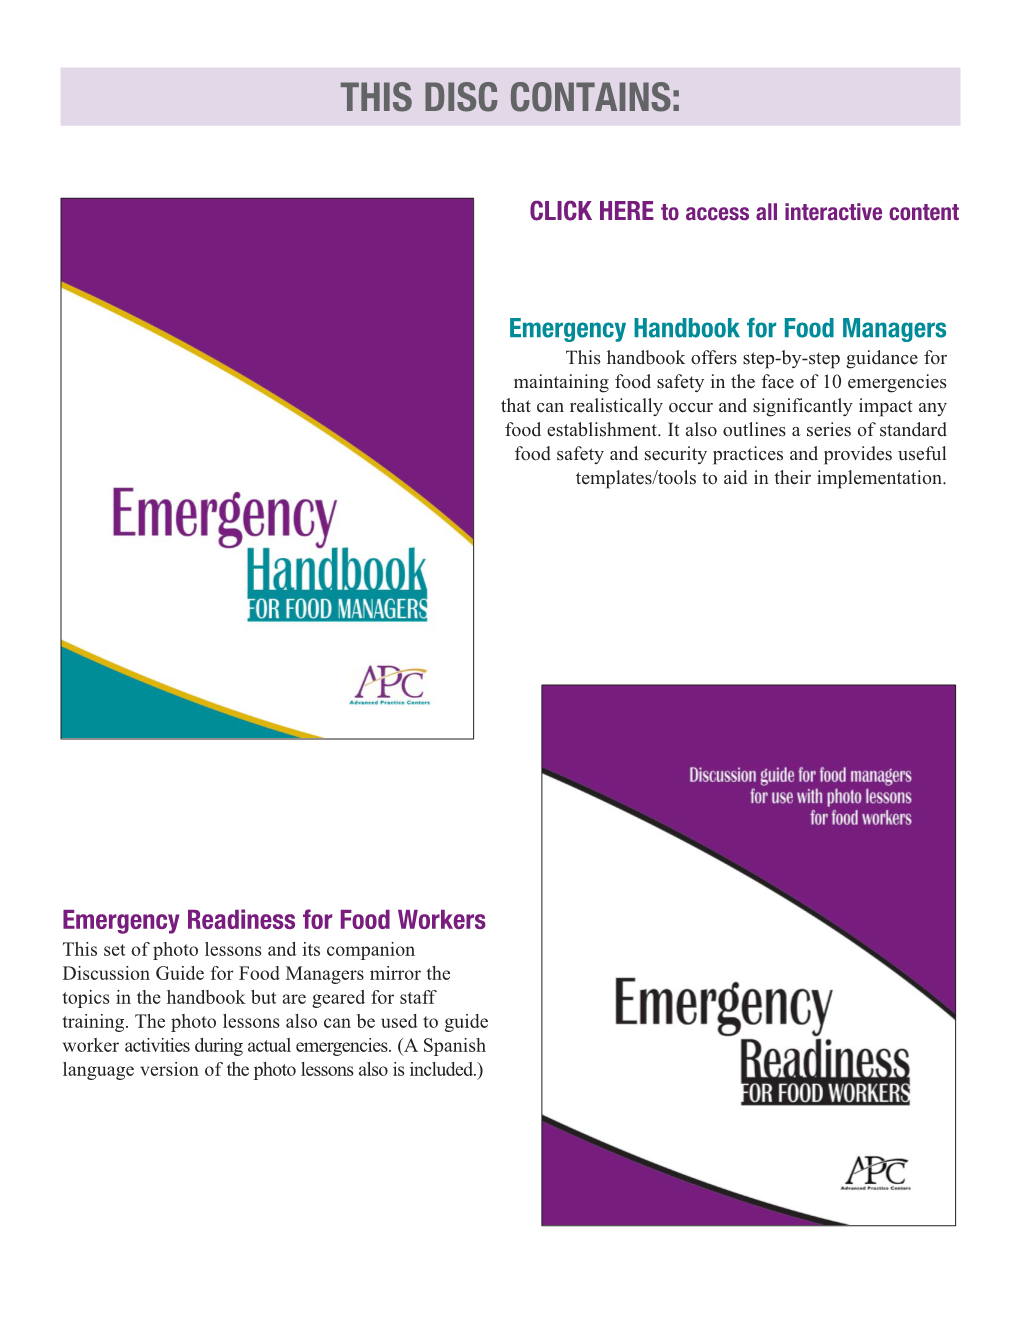 Emergency Handbook for Food Managers